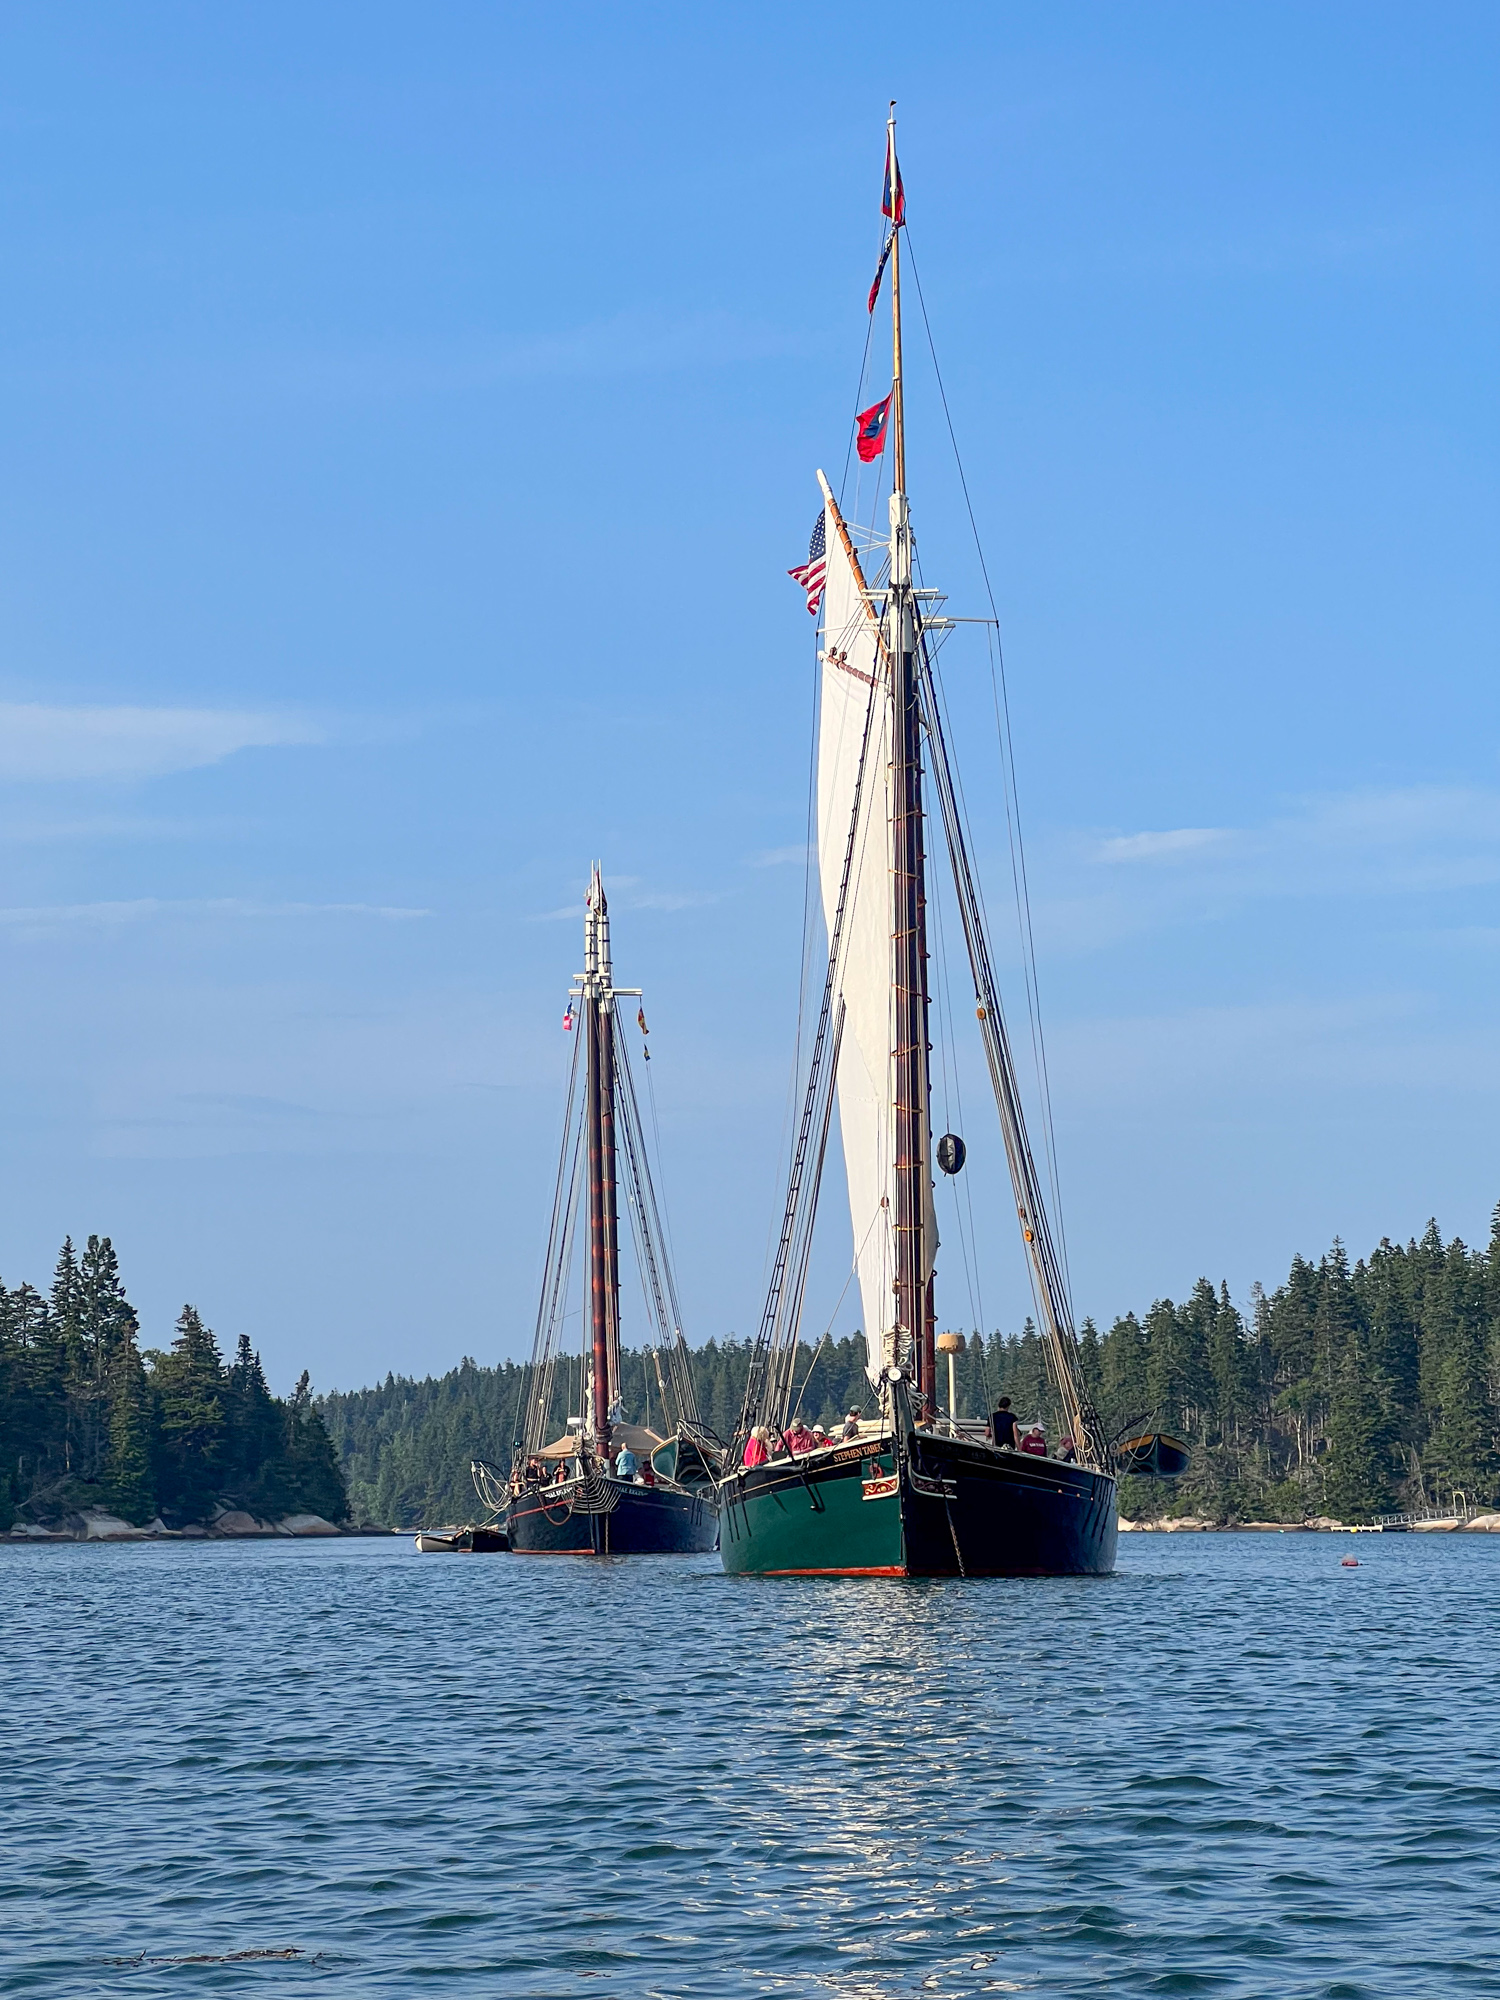 Looking at the bows of Stephen Taber (right) and J & E Riggins (left) near Vinalhaven Island, ME